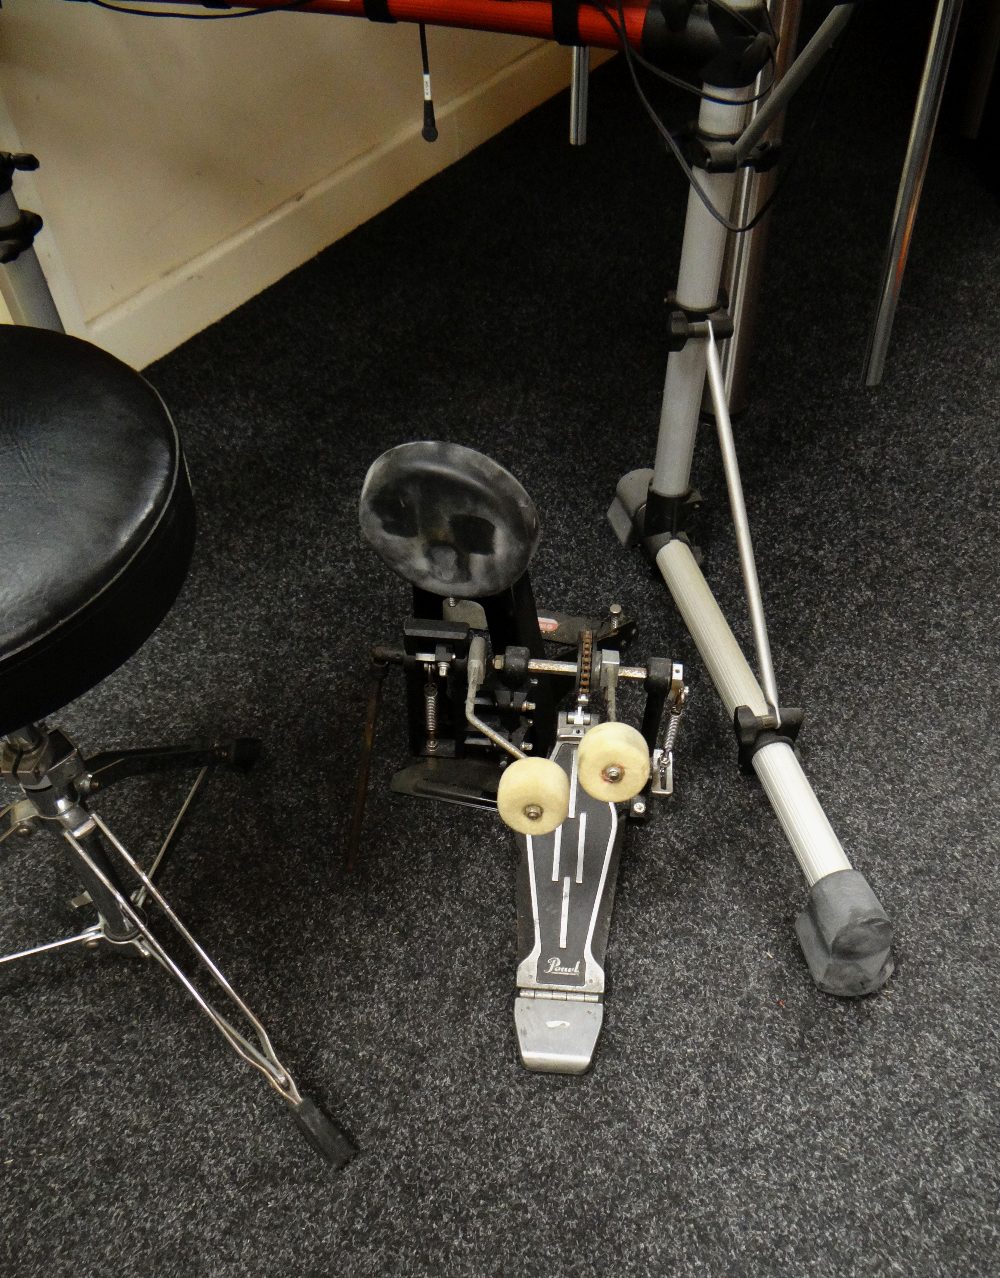 YAMAHA DTXPRESS III ELECTRONIC DRUM KIT, three drums pads, three cymbal pads, high hat cymbal pad - Image 4 of 4